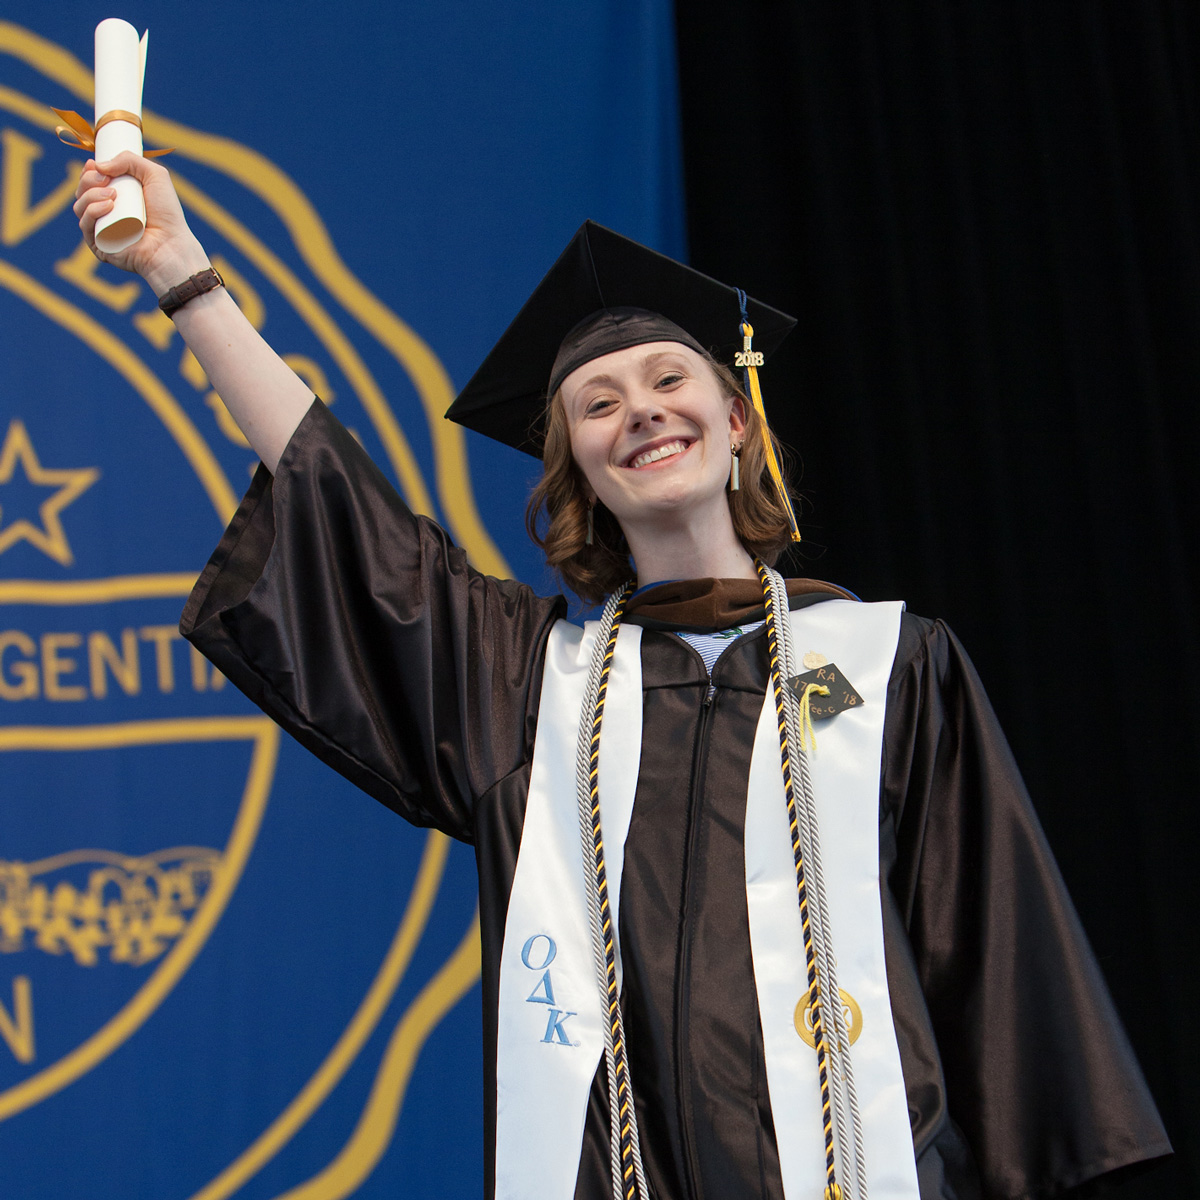 Brianna wearing her cap and gown while holding up her scroll on stage at Commencement.